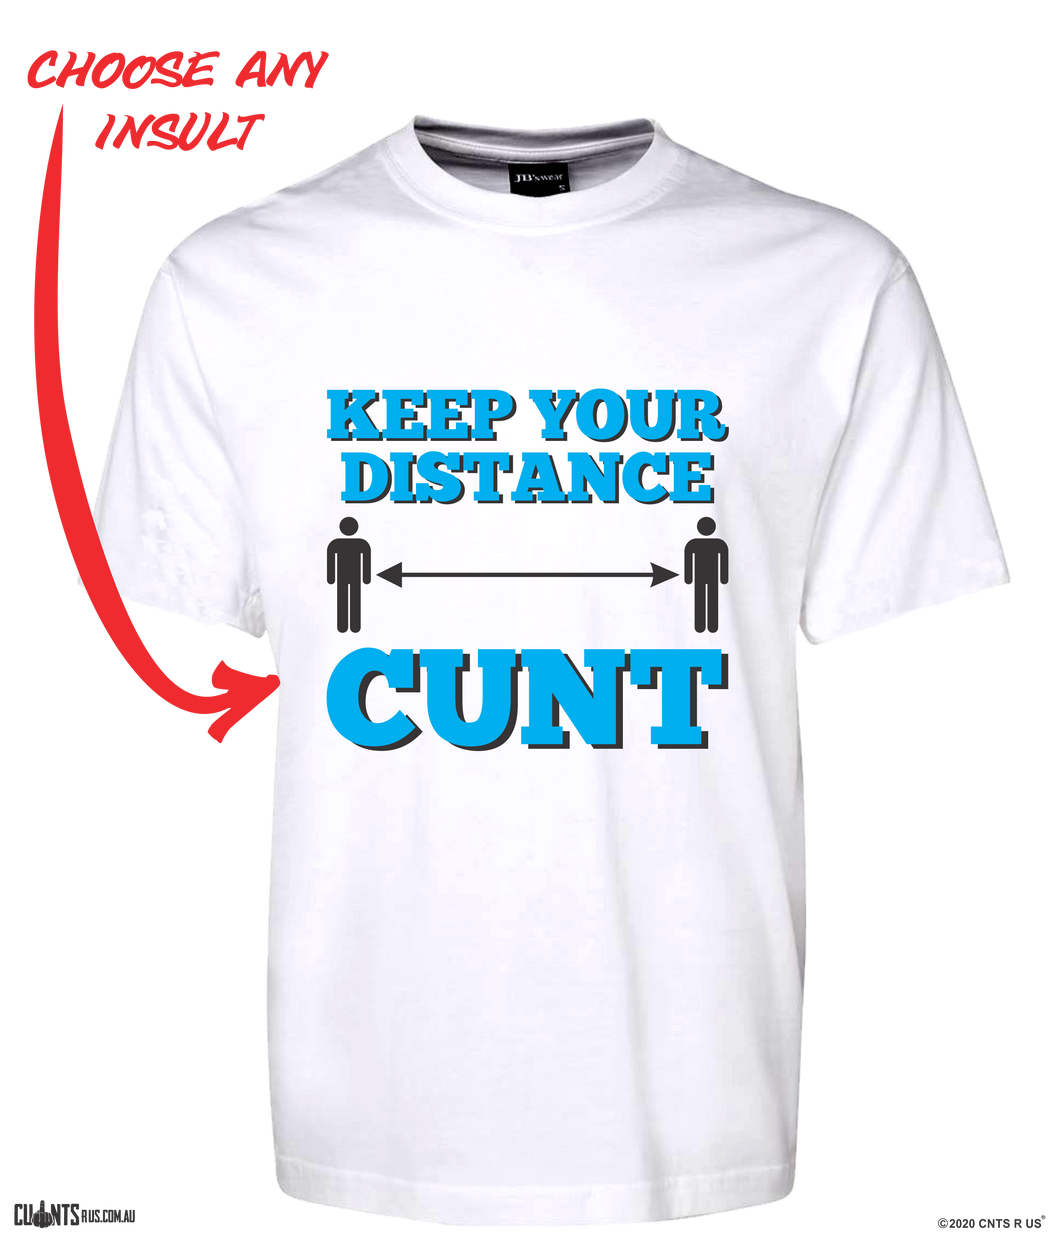 Keep Your Distance Cunt T-Shirt Adult Tee CRU01-1HT-24020